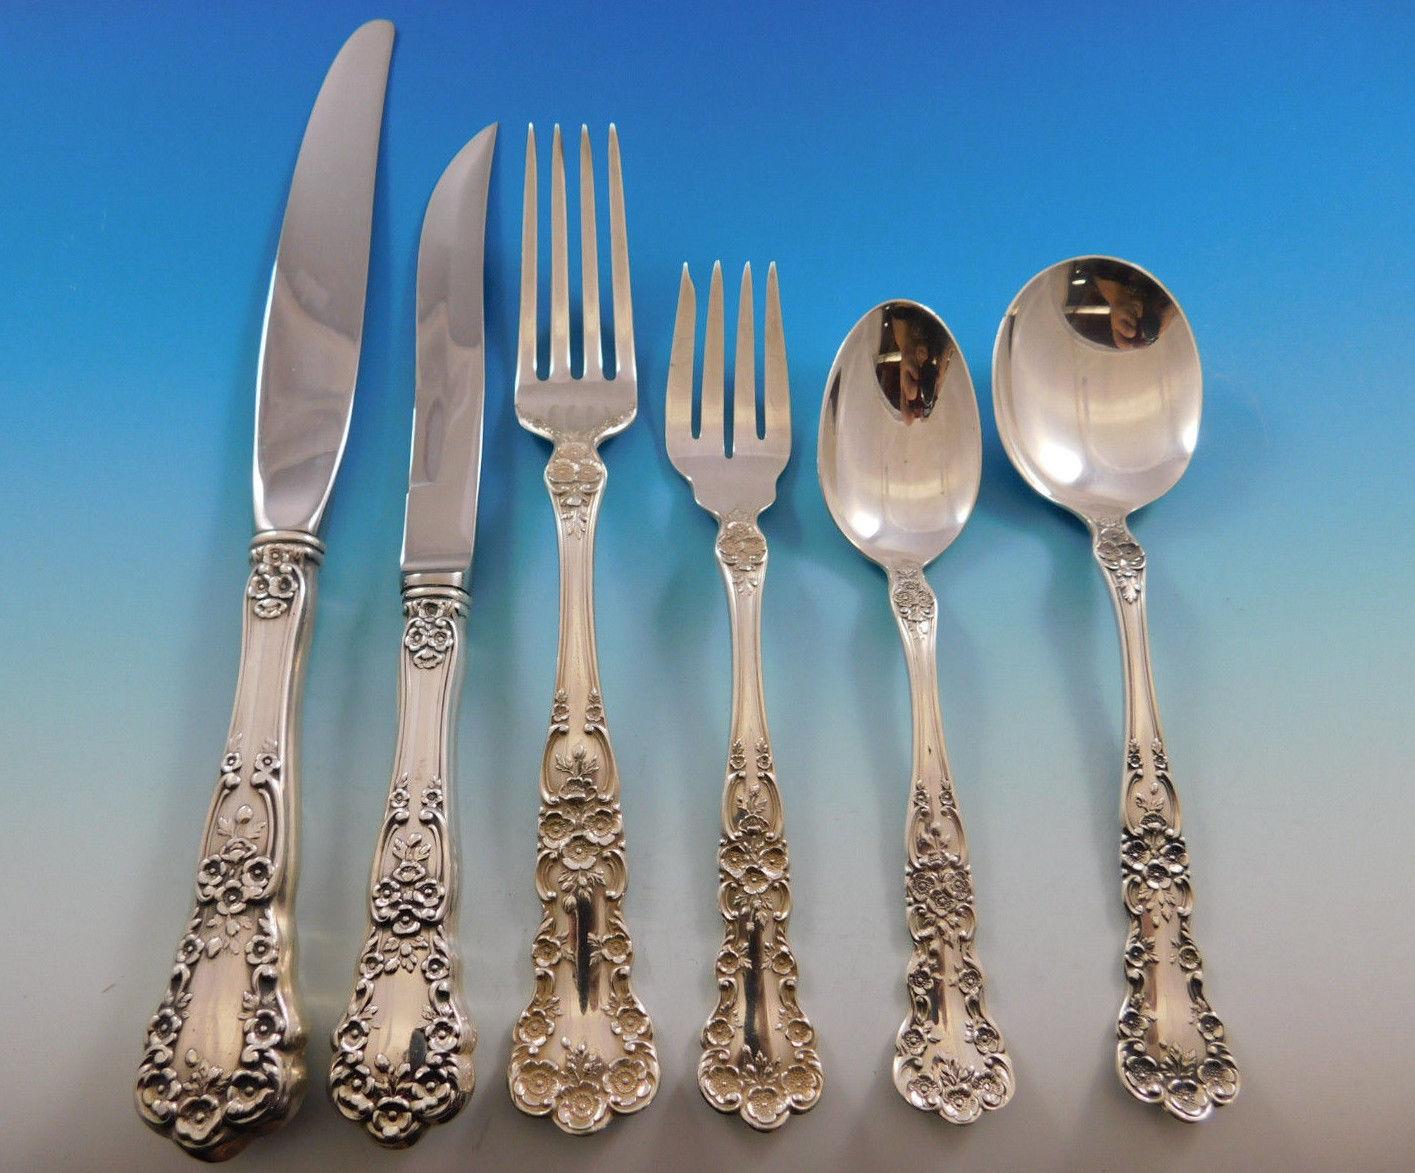 Superb dinner size buttercup by Gorham sterling silver flatware set, 84 pieces. This set includes:

12 dinner size knives, 9 3/4